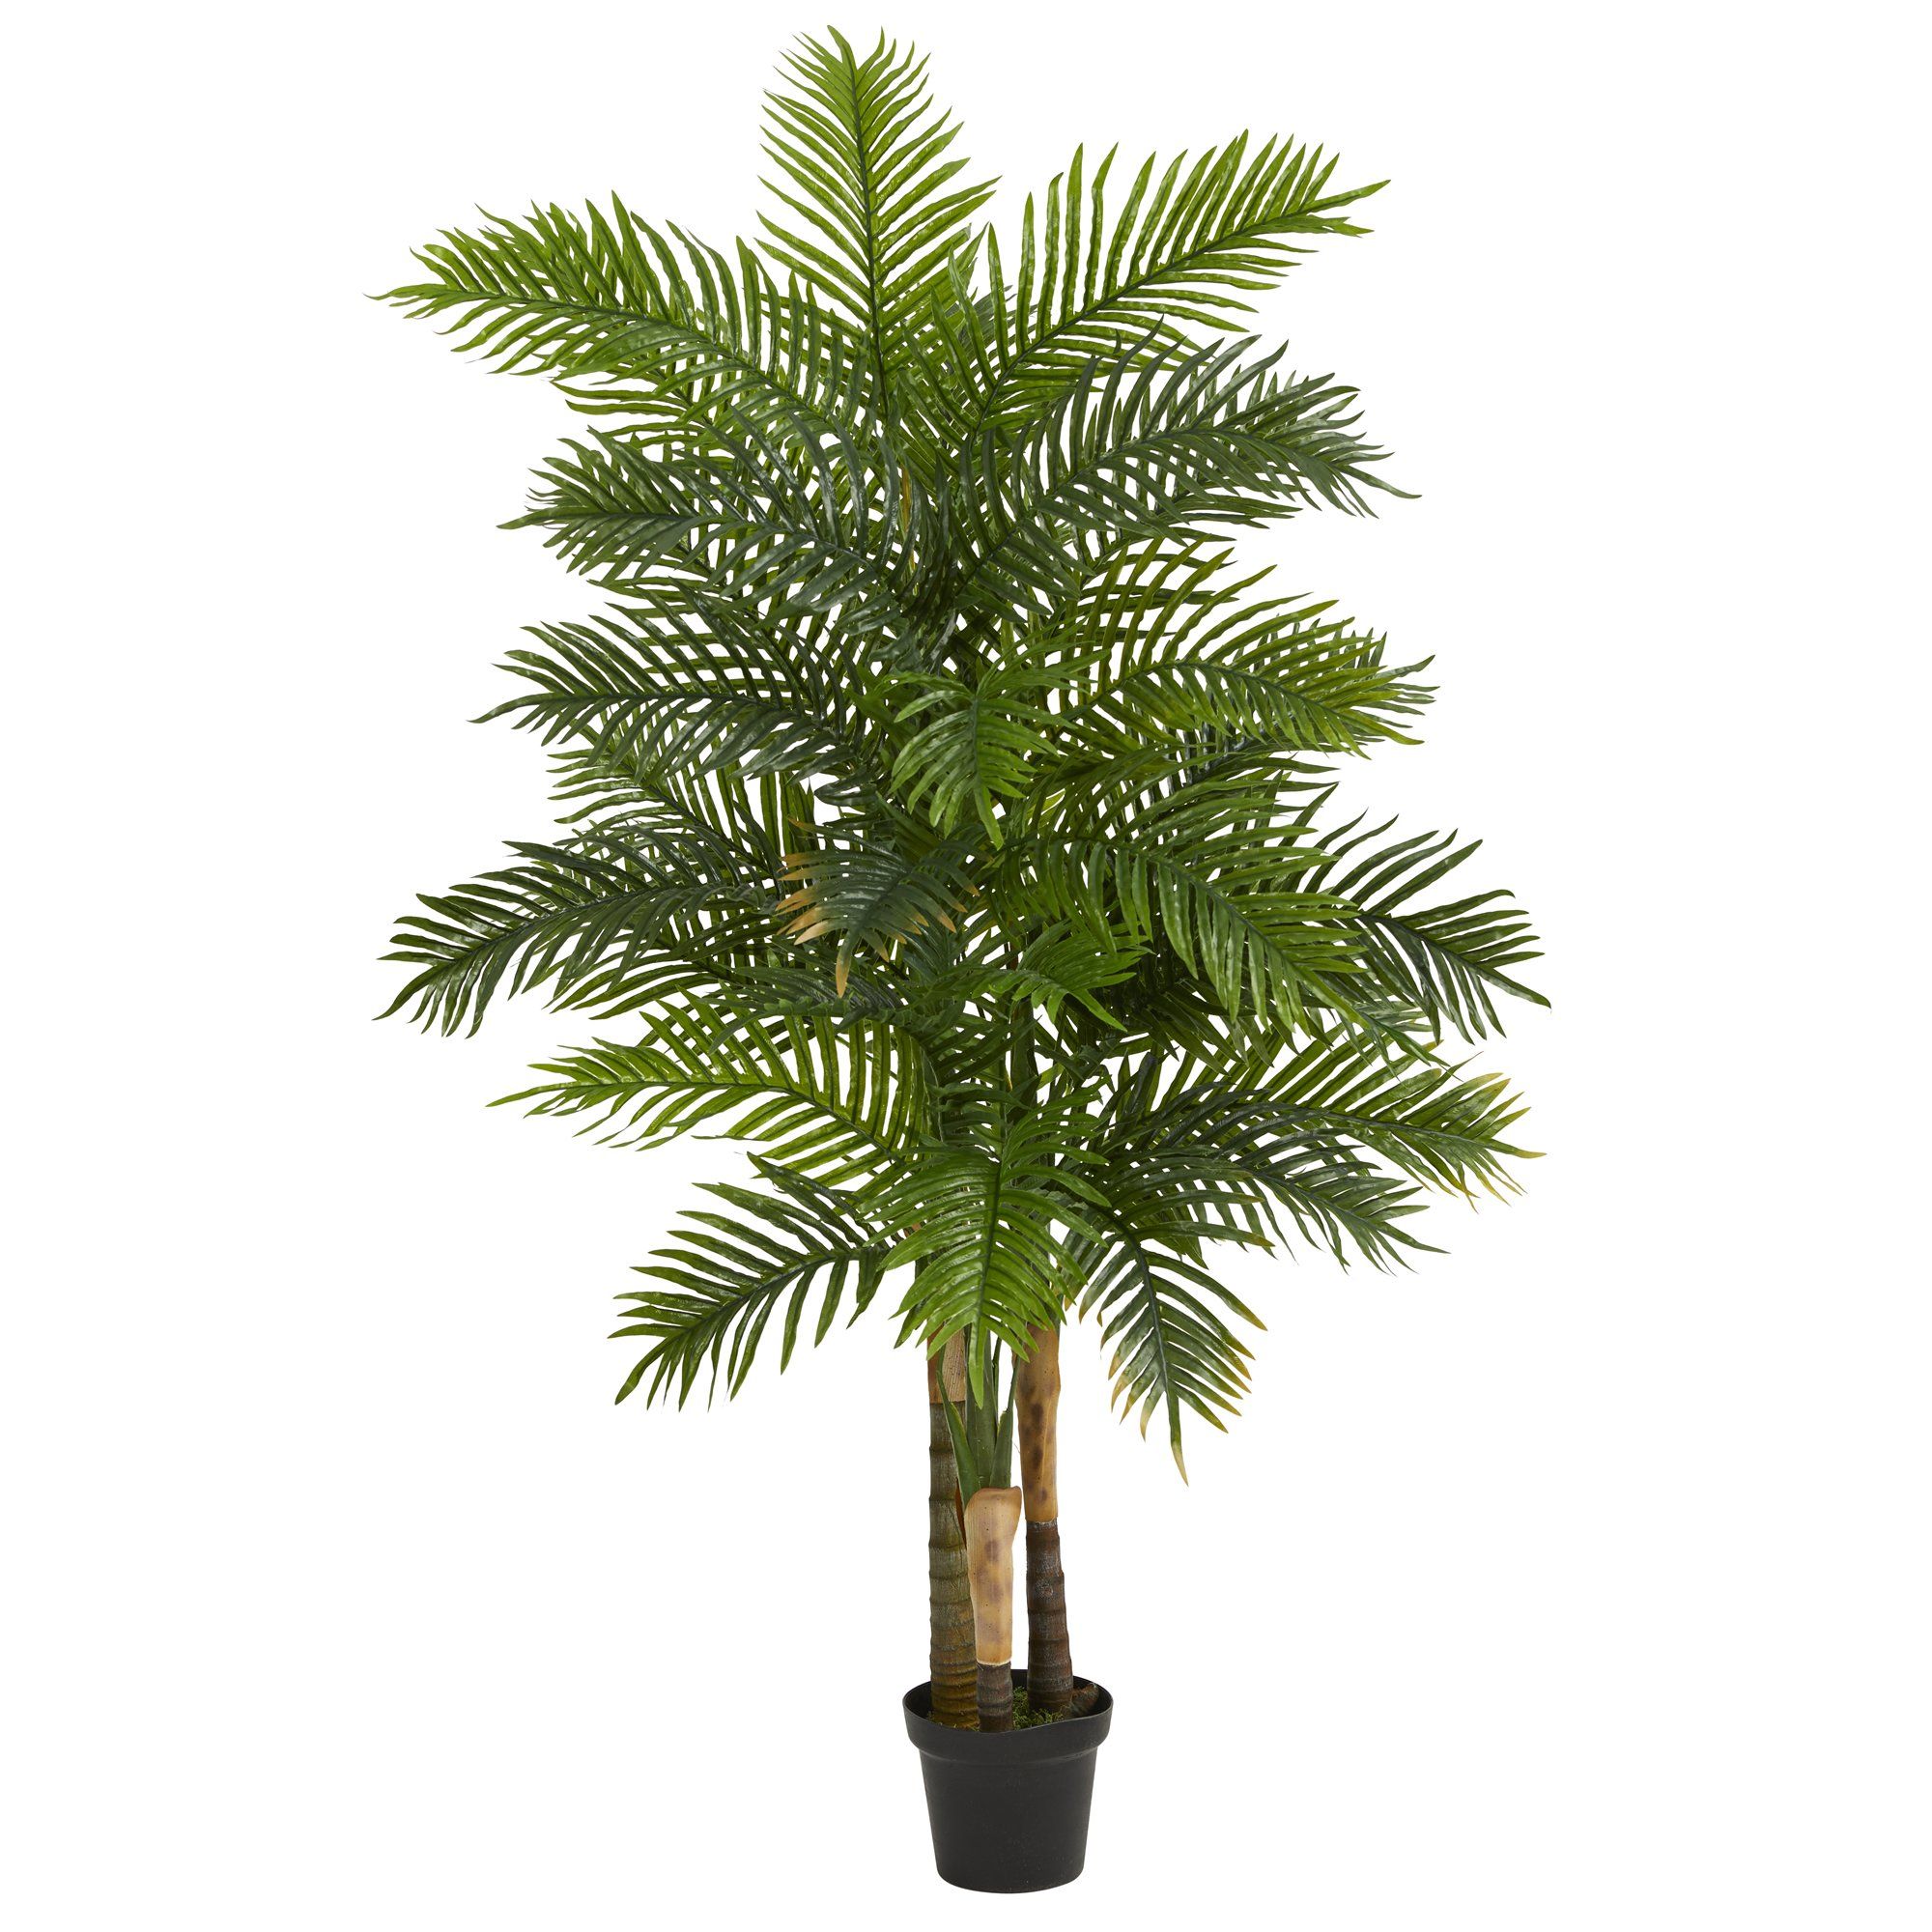 Two 6' Artificial Areca Palm Trees Silk Plants In Pot 